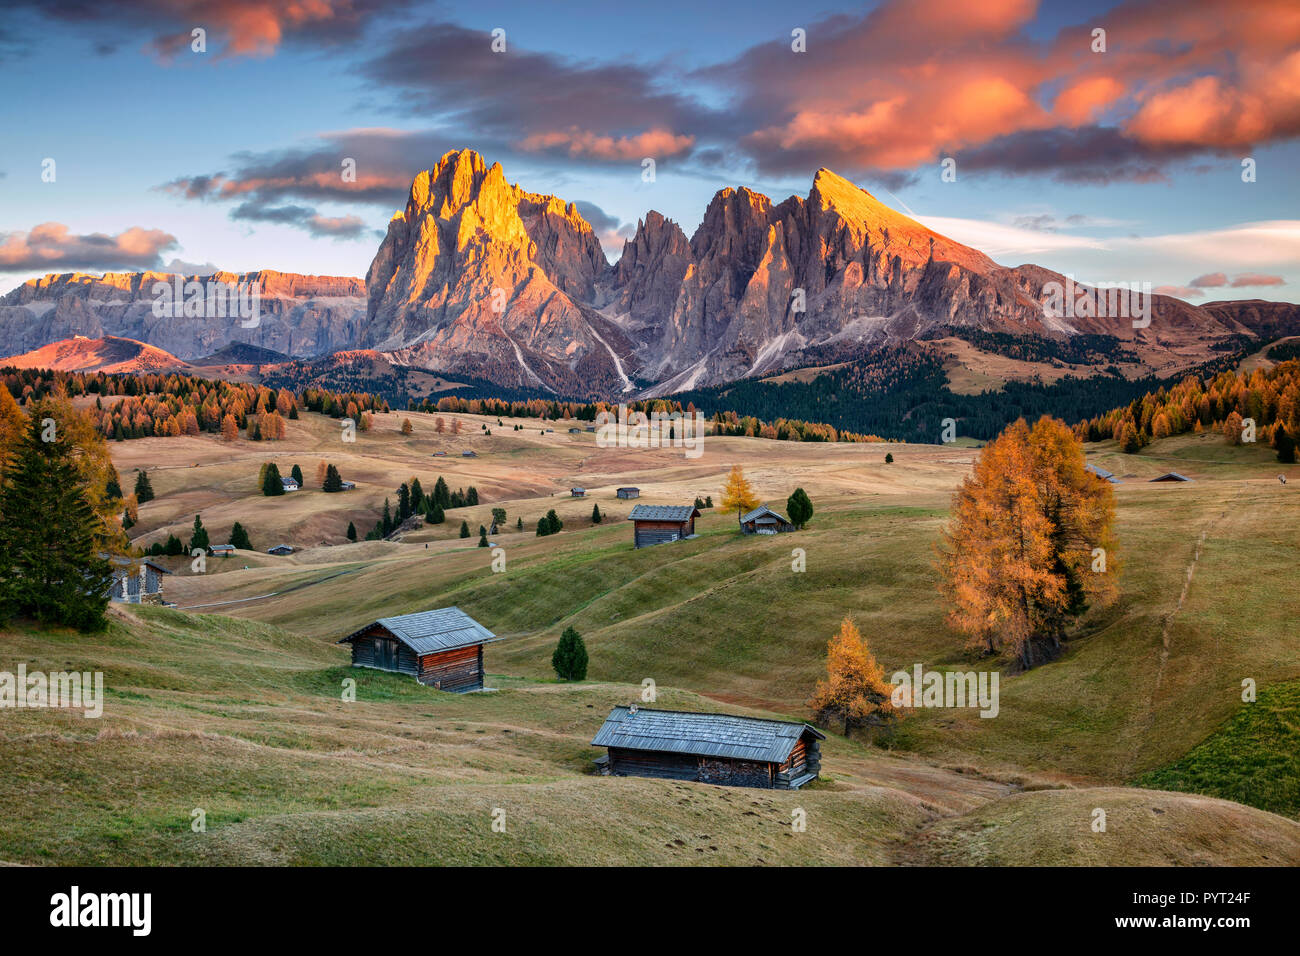 Dolomites. Landscape image of Seiser Alm a Dolomite plateau and the largest high-altitude Alpine meadow in Europe. Stock Photo